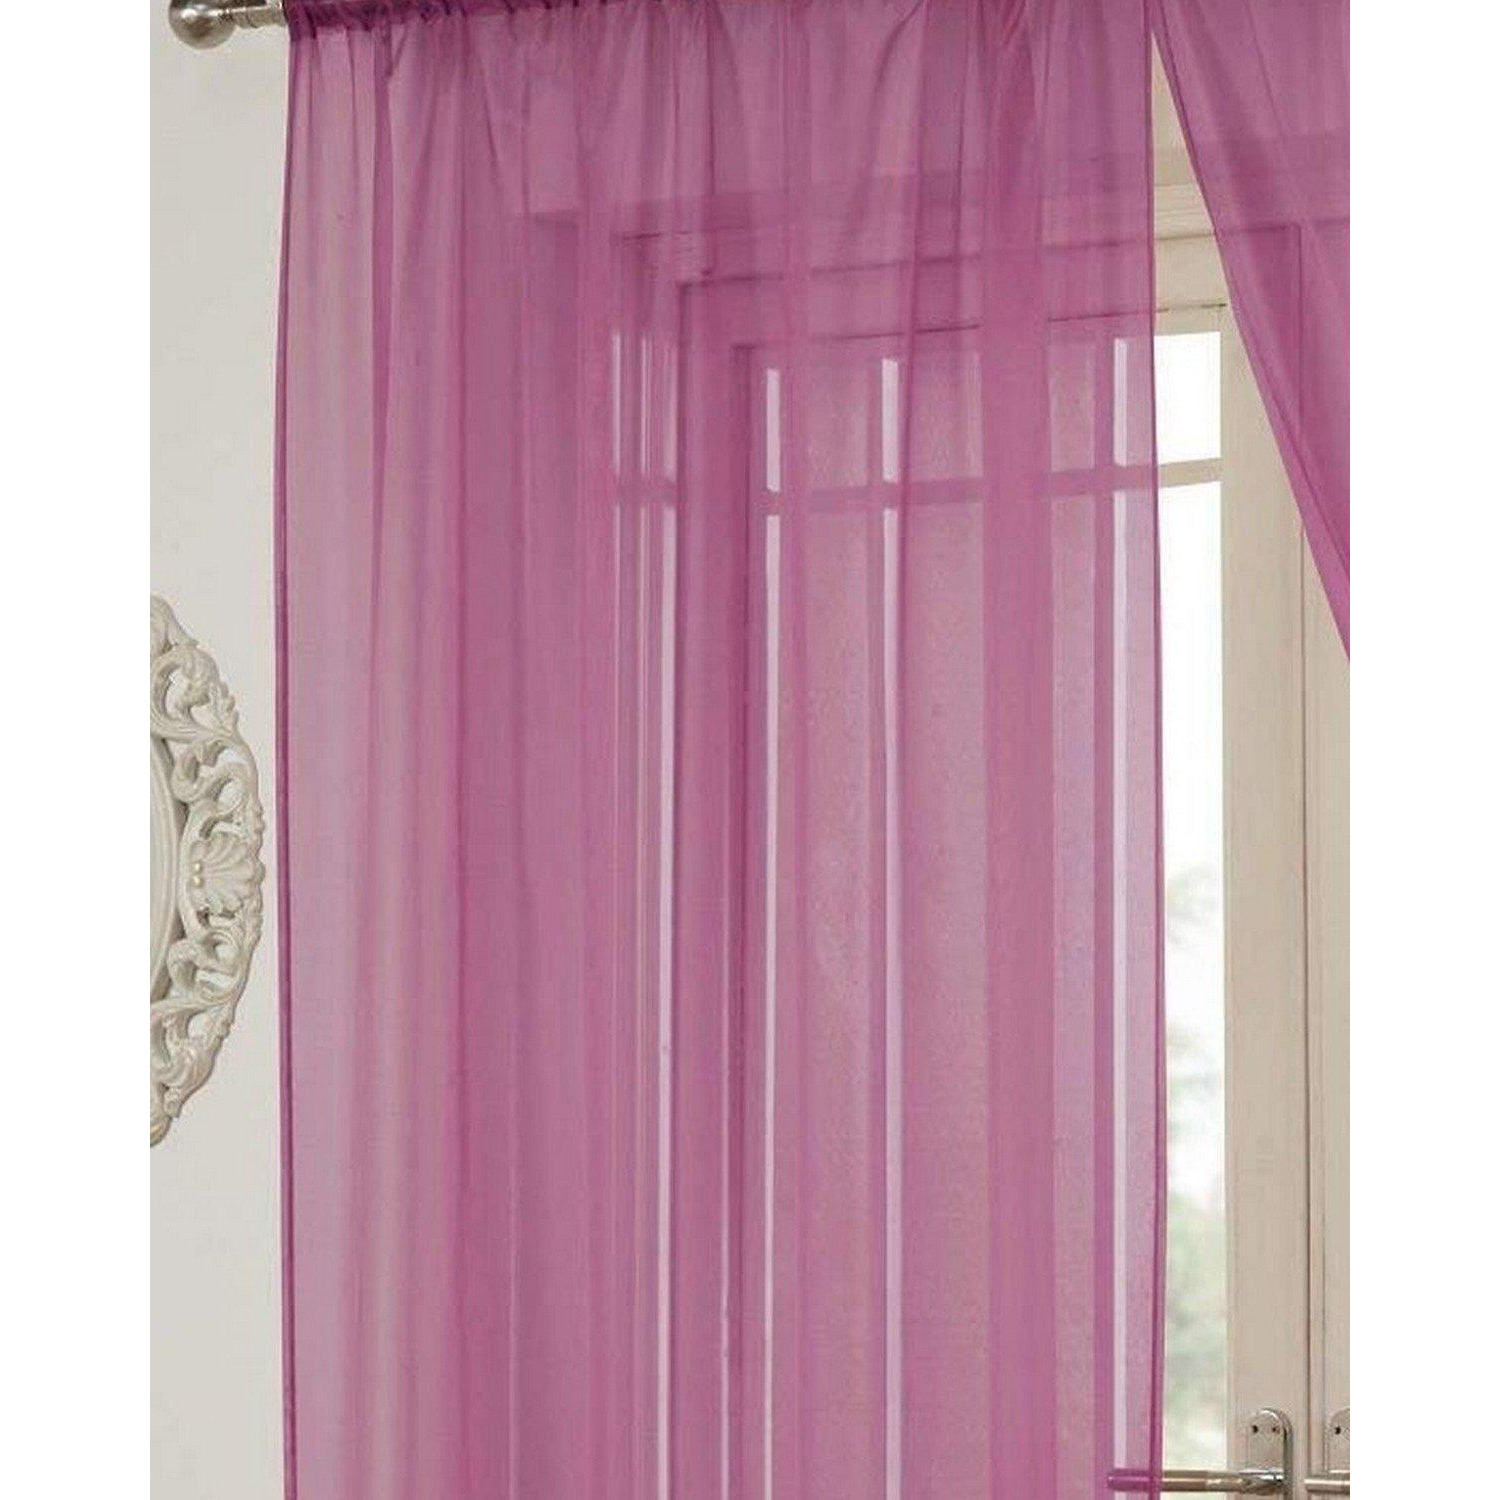 Plain Voile Panel Lucy Sheer Net Curtain